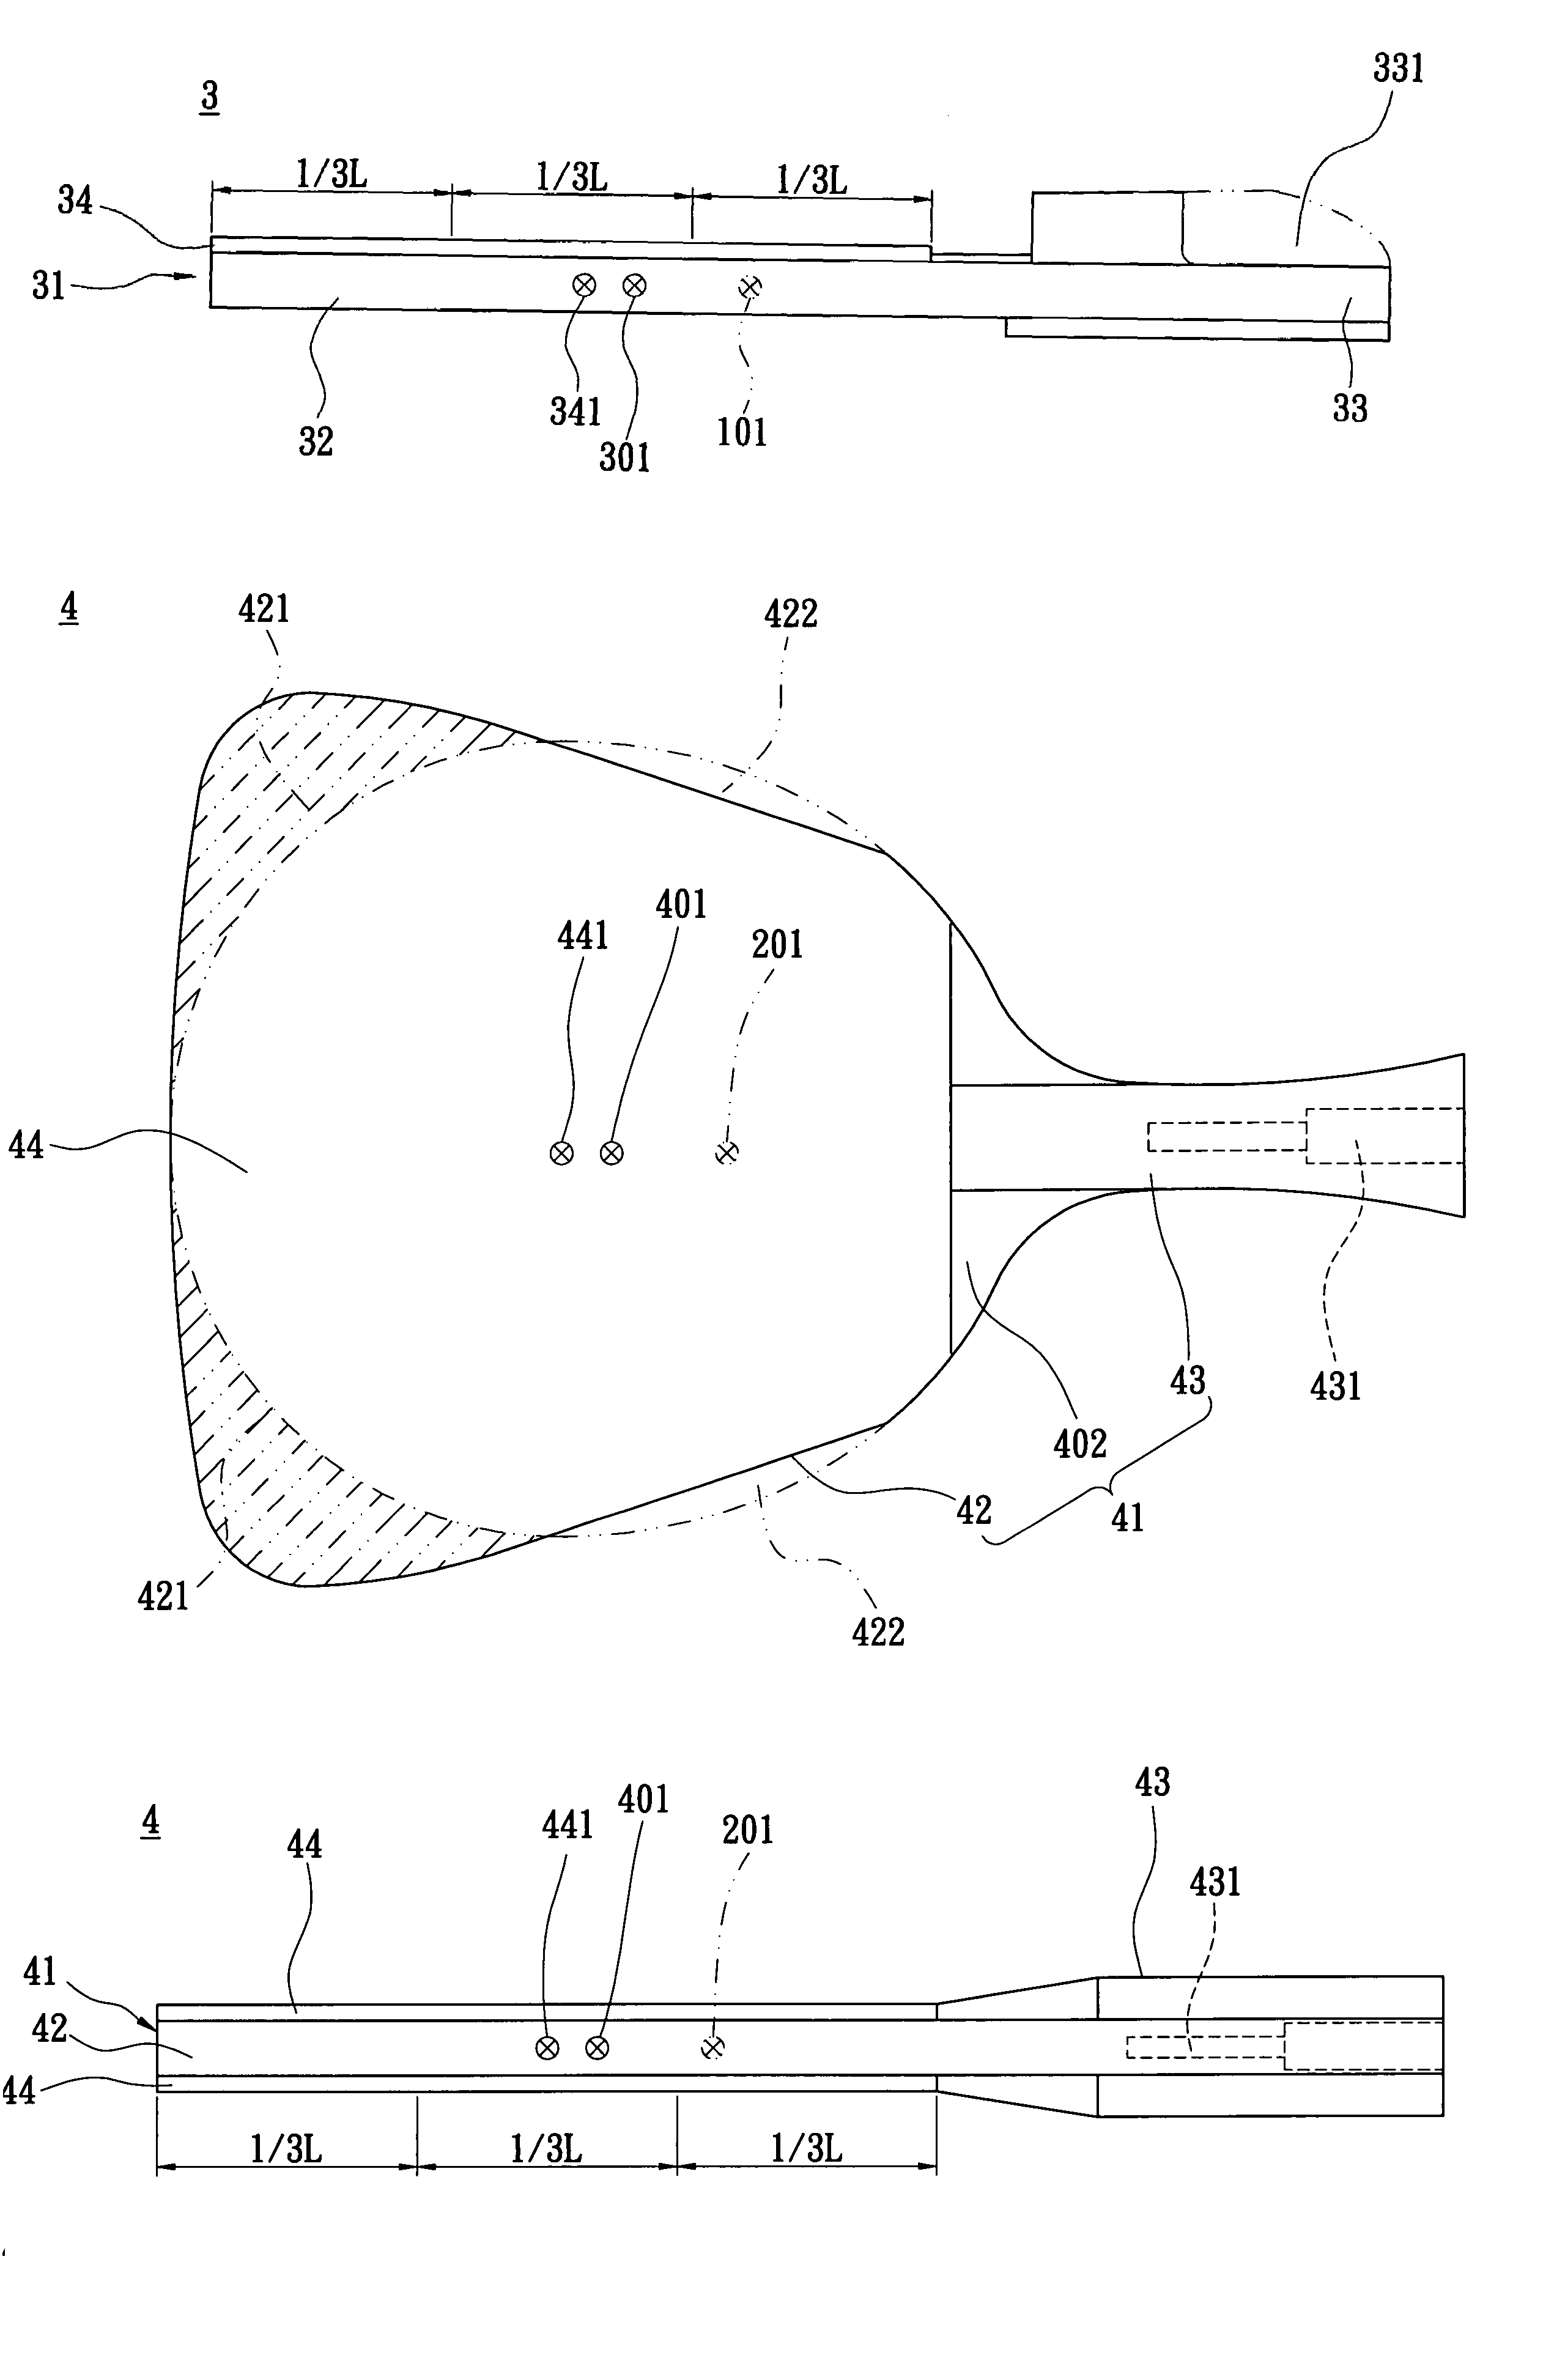 Racket with a center of gravity approximate to a center of a rubber sheet